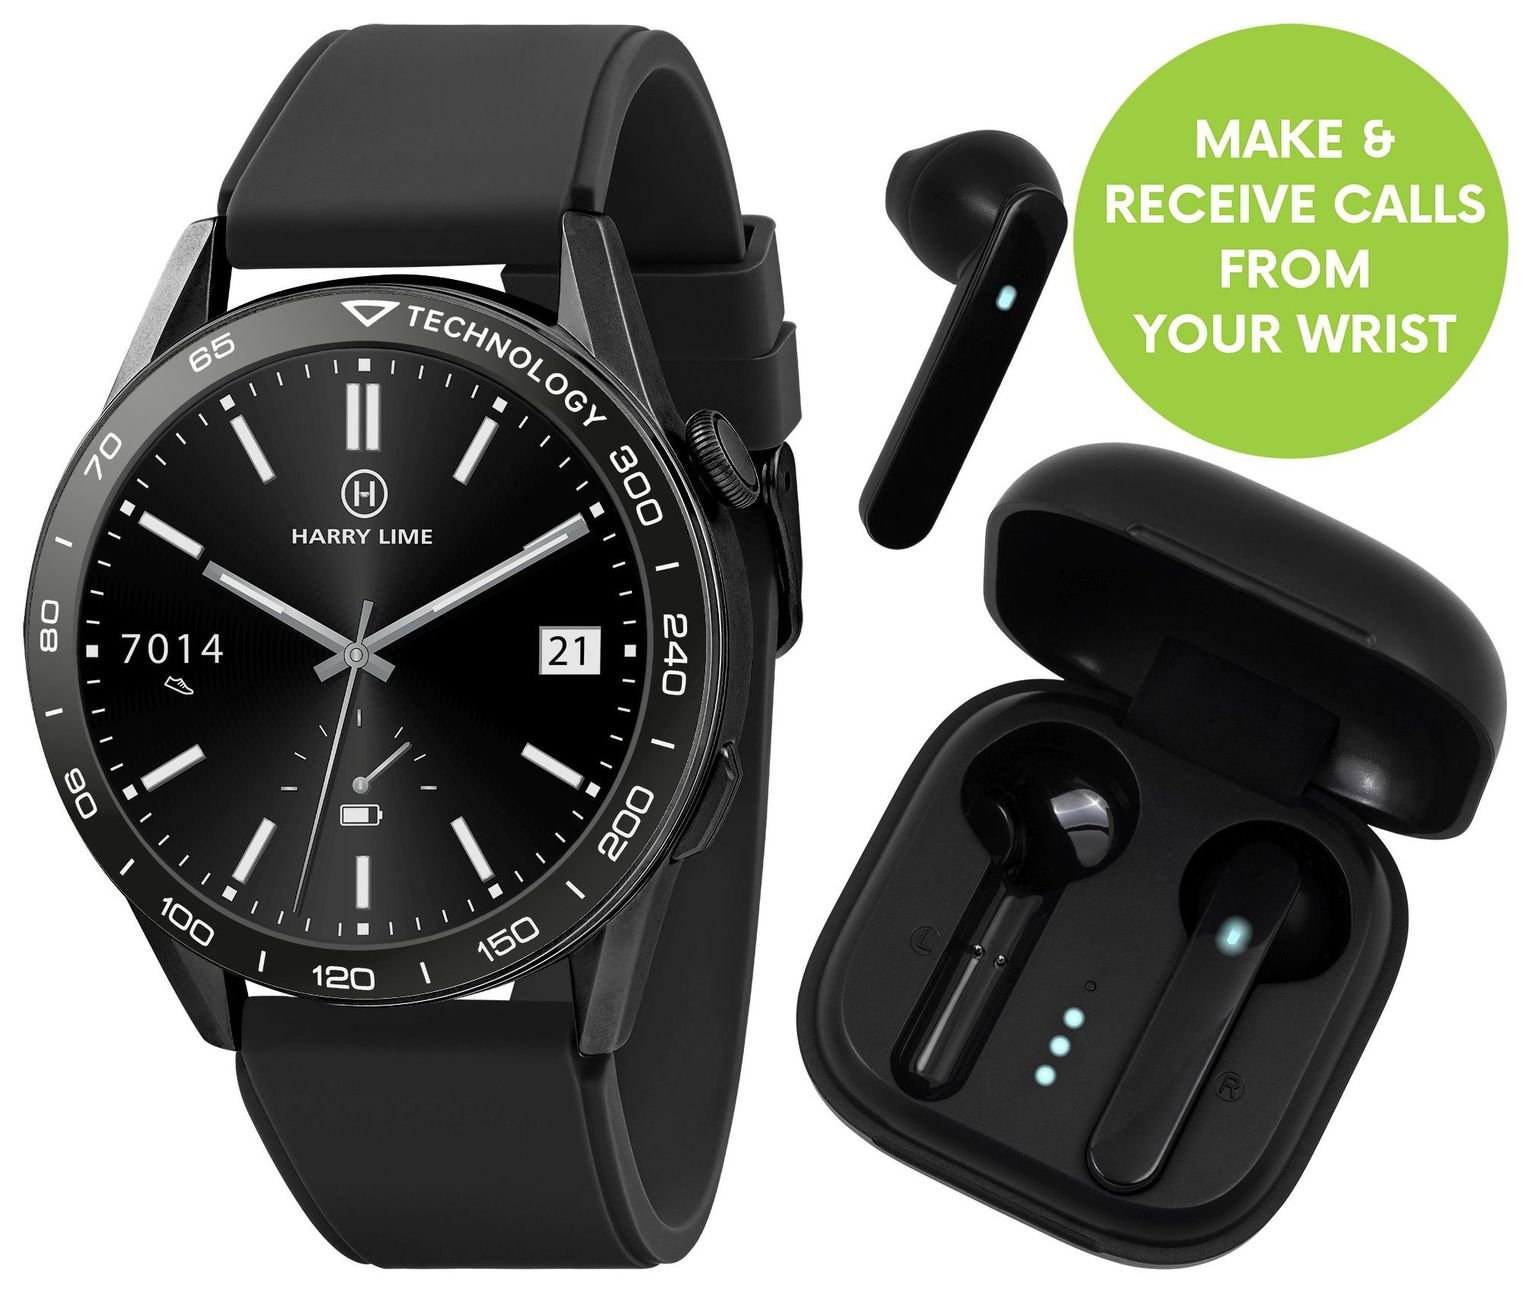 Harry Lime Black Calling Smart Watch and Earbud Set